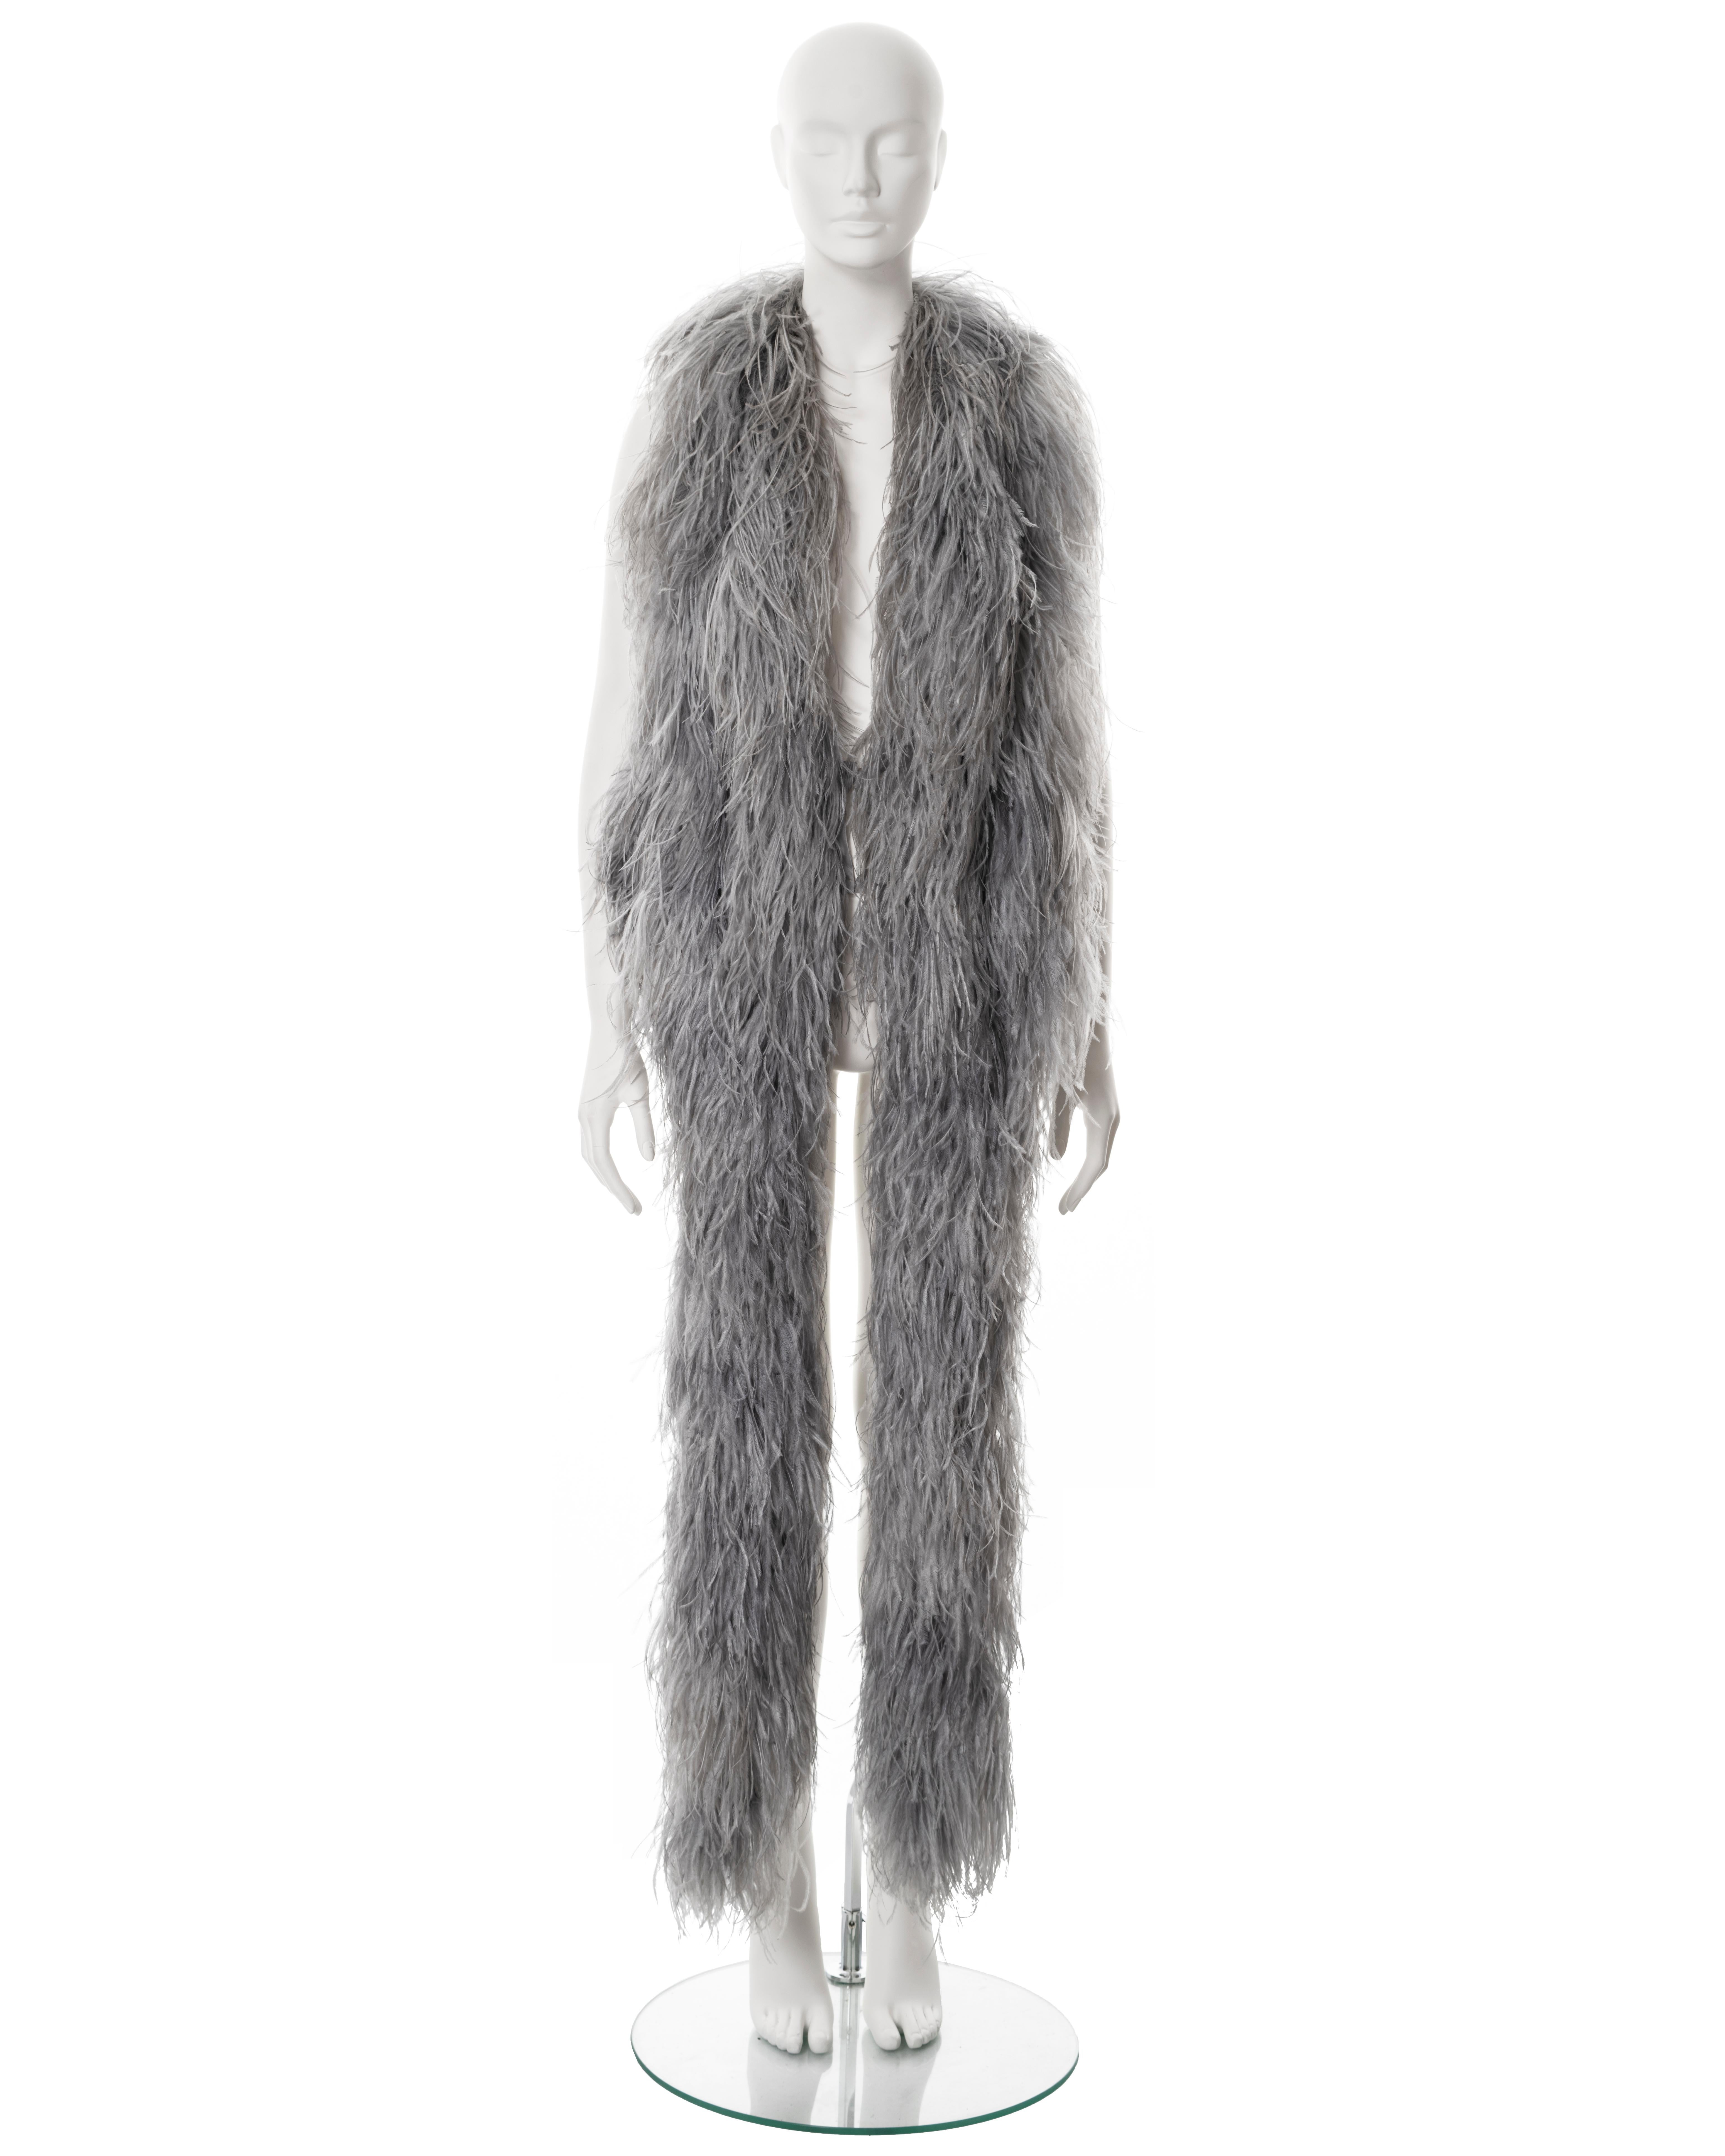 ▪ Martin Margiela artisanal waistcoat
▪ Sold by One of a Kind Archive
▪ Fall-Winter 2004
▪ Constructed from several grey ostrich feather panels 
▪ Built-in waistcoat with hook fastenings 
▪ Longer front 
▪ Open at the back exposing the back of an